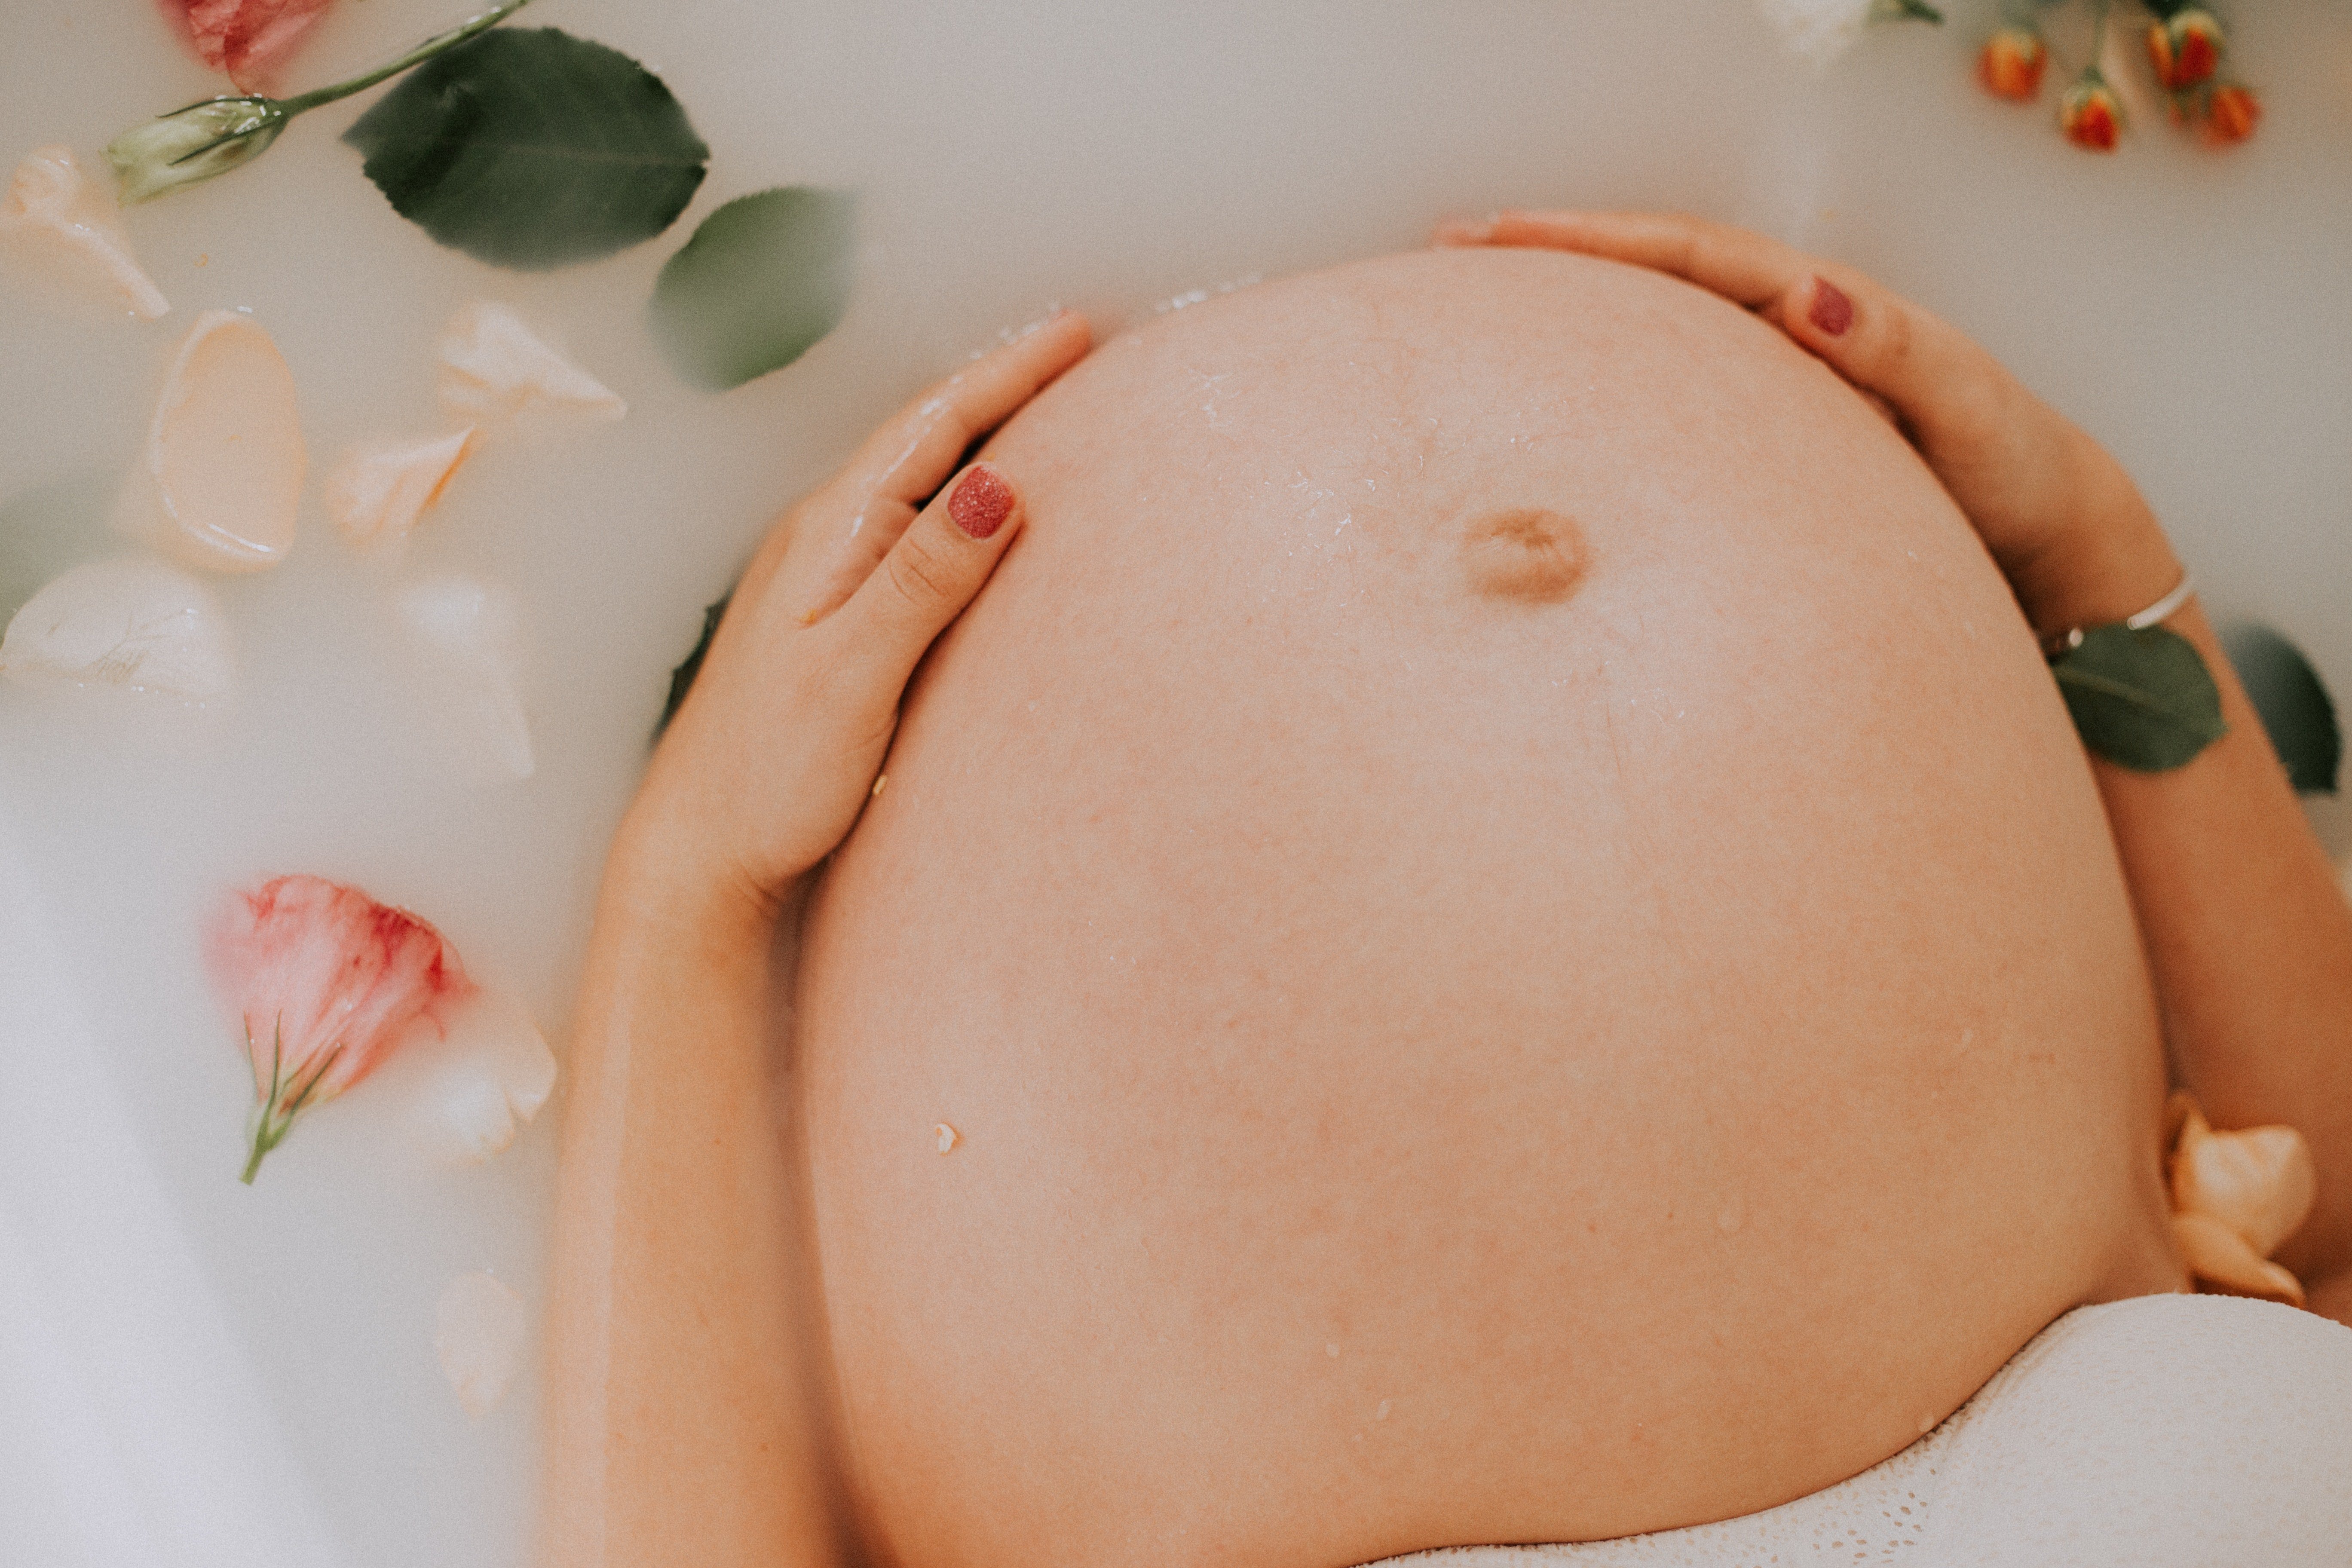 Image of a pregnant woman | Source: Pexels